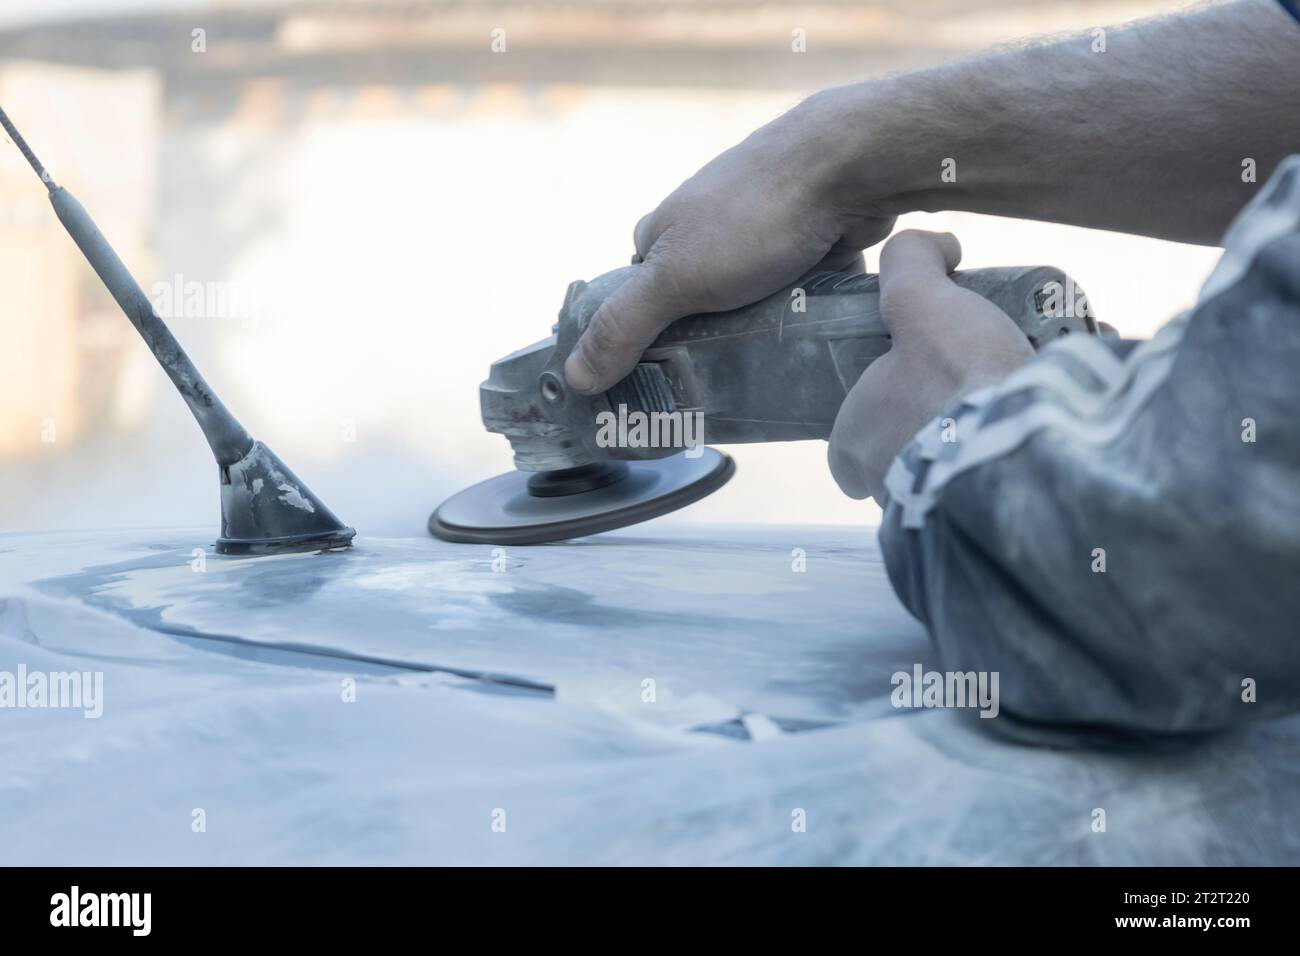 Hands of the auto repairman grinding roof of the car. Stock Photo